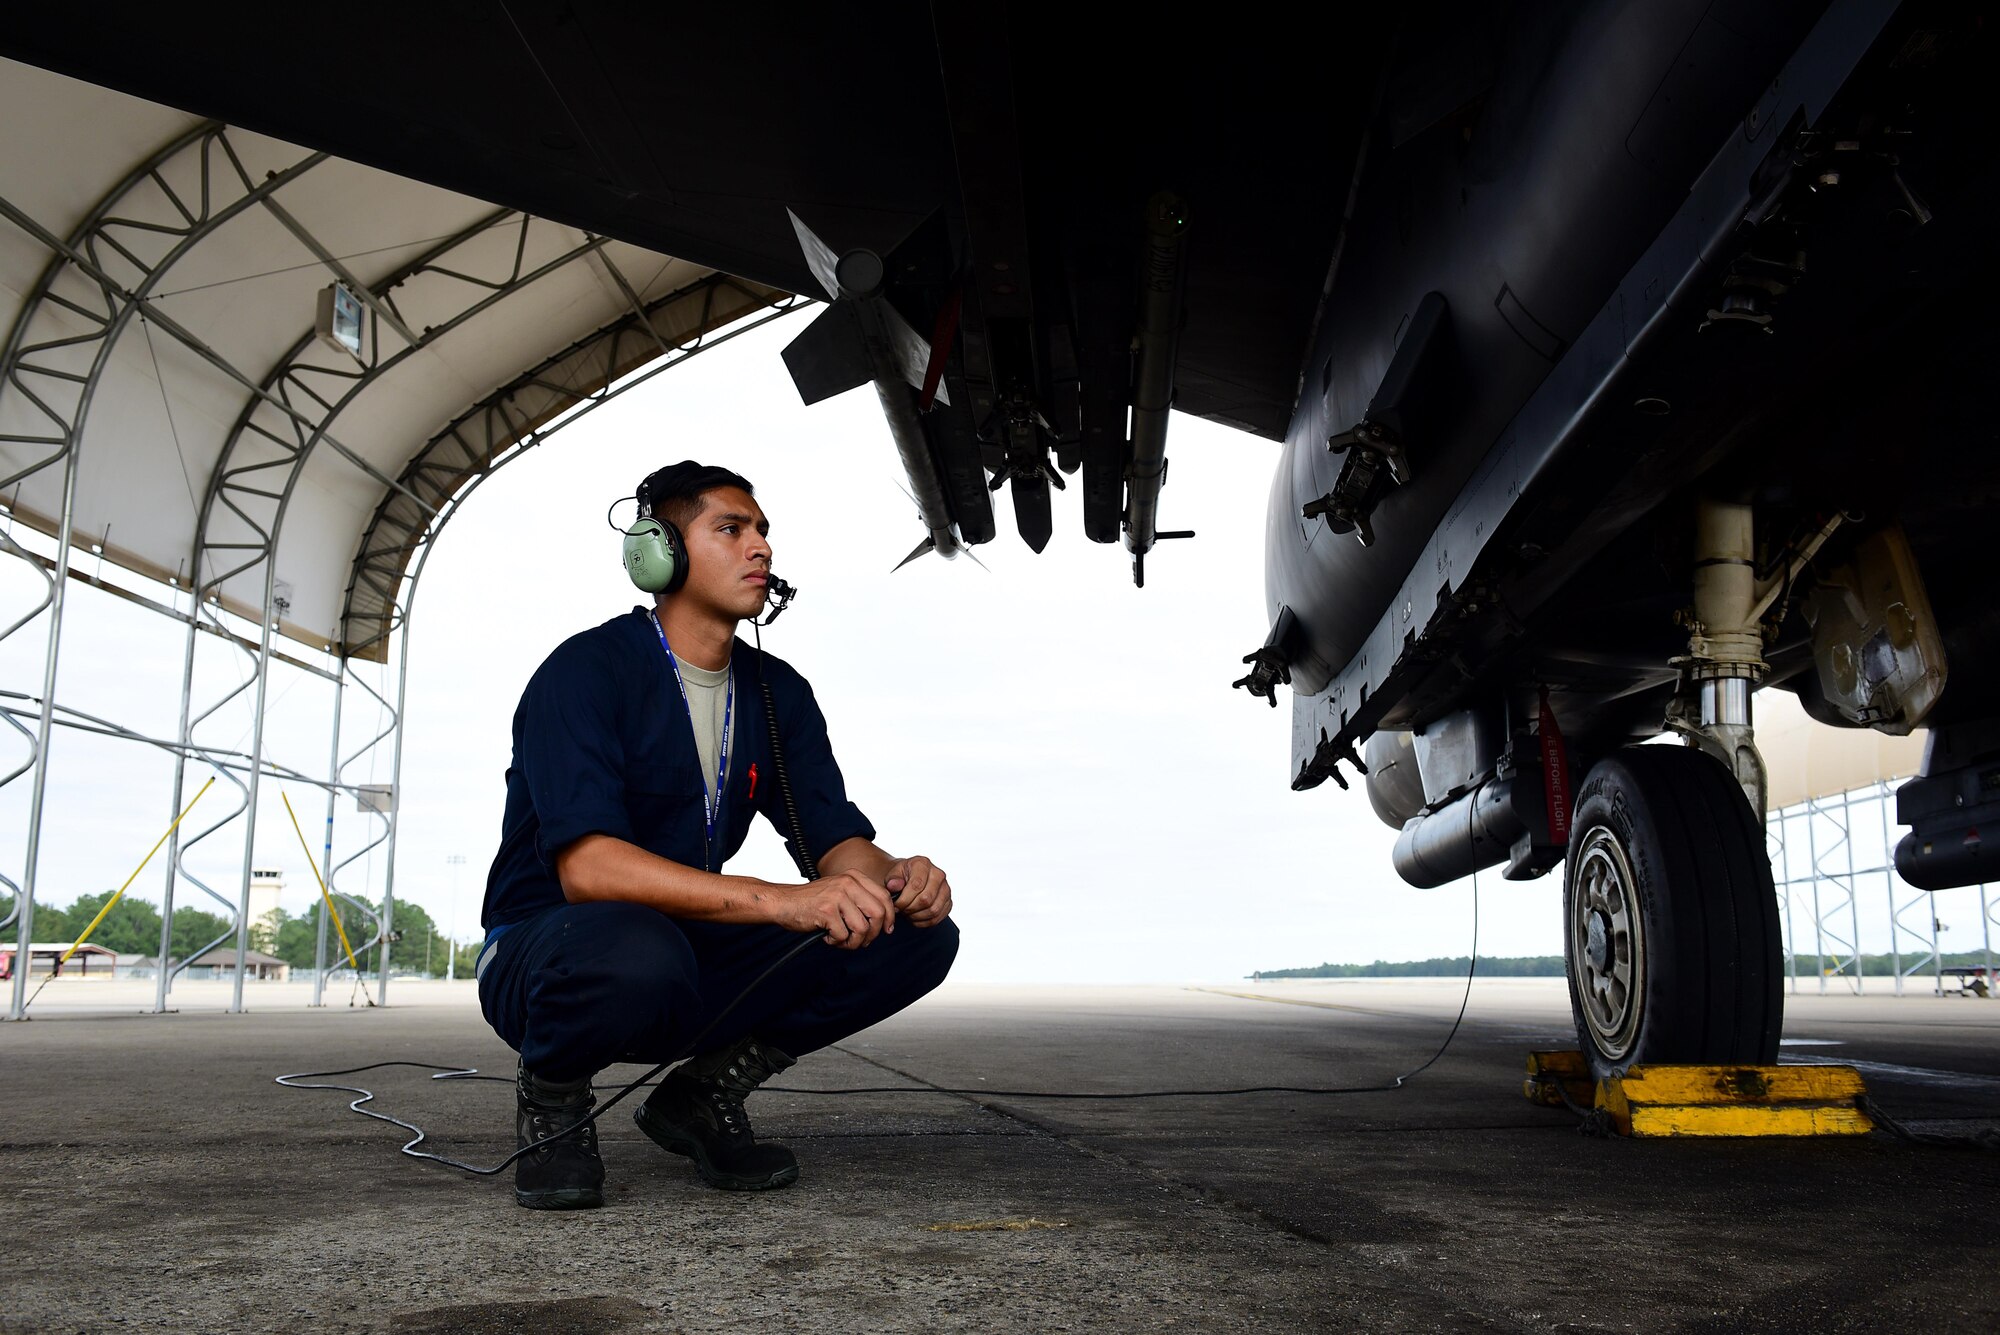 Senior Airman Juan Cruz, 4th Aircraft Maintenance Squadron crew chief, conducts a preflight check, Oct. 4, 2017, at Seymour Johnson Air Force Base, North Carolina. Cruz was highlighted during Hispanic Heritage Month for being recognized as an outstanding Airman by his leadership. (U.S. Air Force photo by Airman 1st Class Kenneth Boyton)